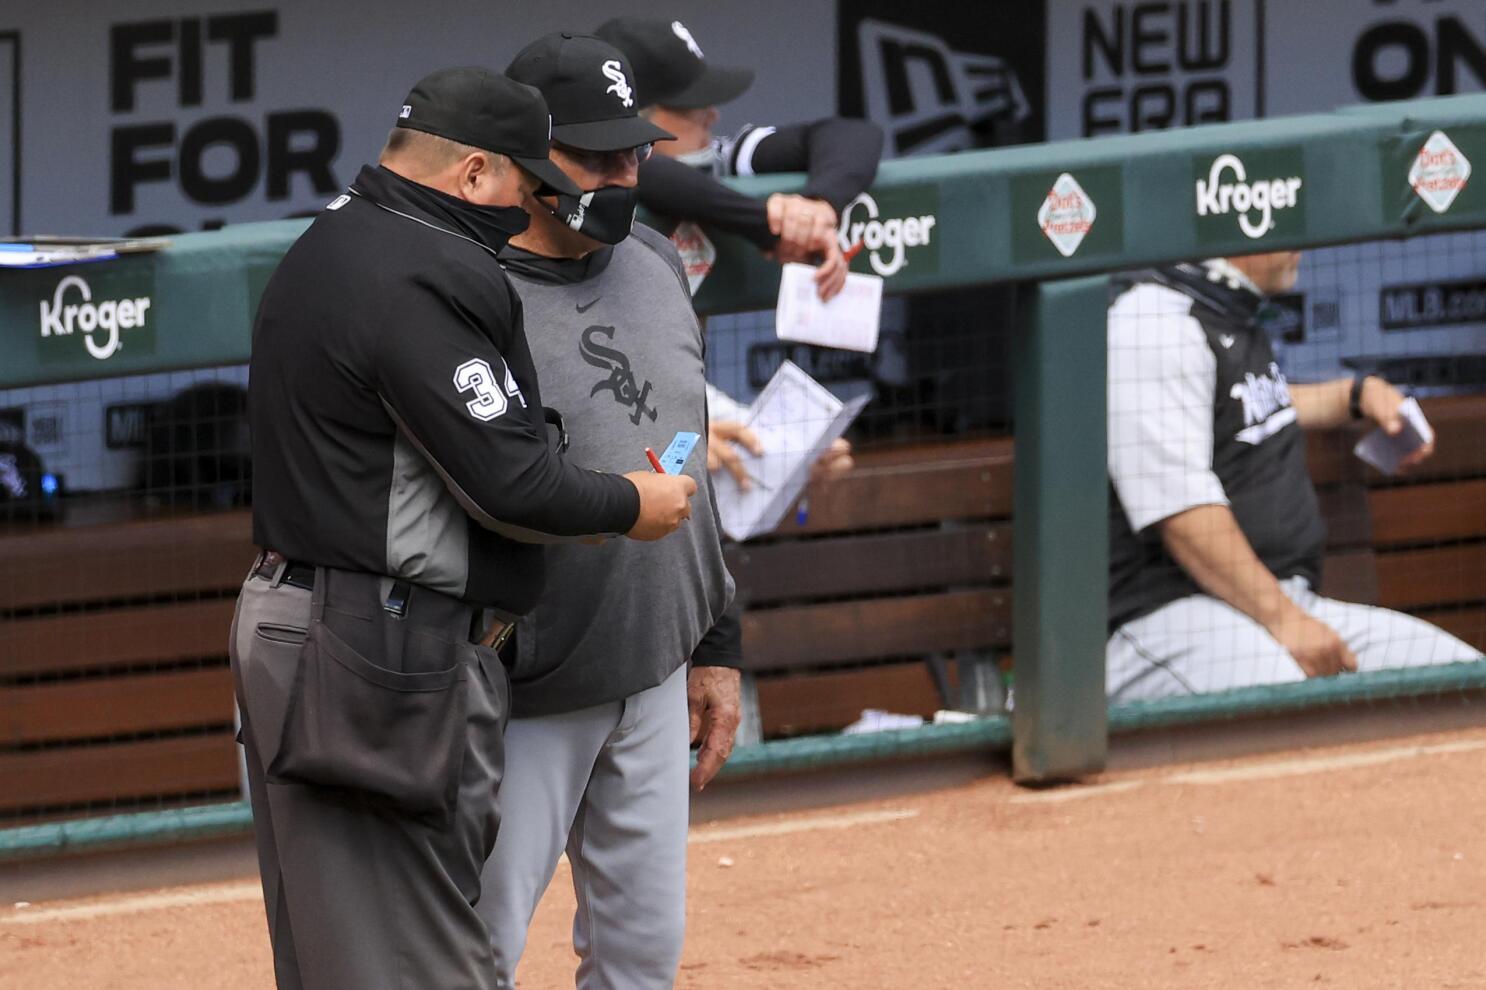 MLB umpire Gabe Morales (47) in the first inning during a baseball